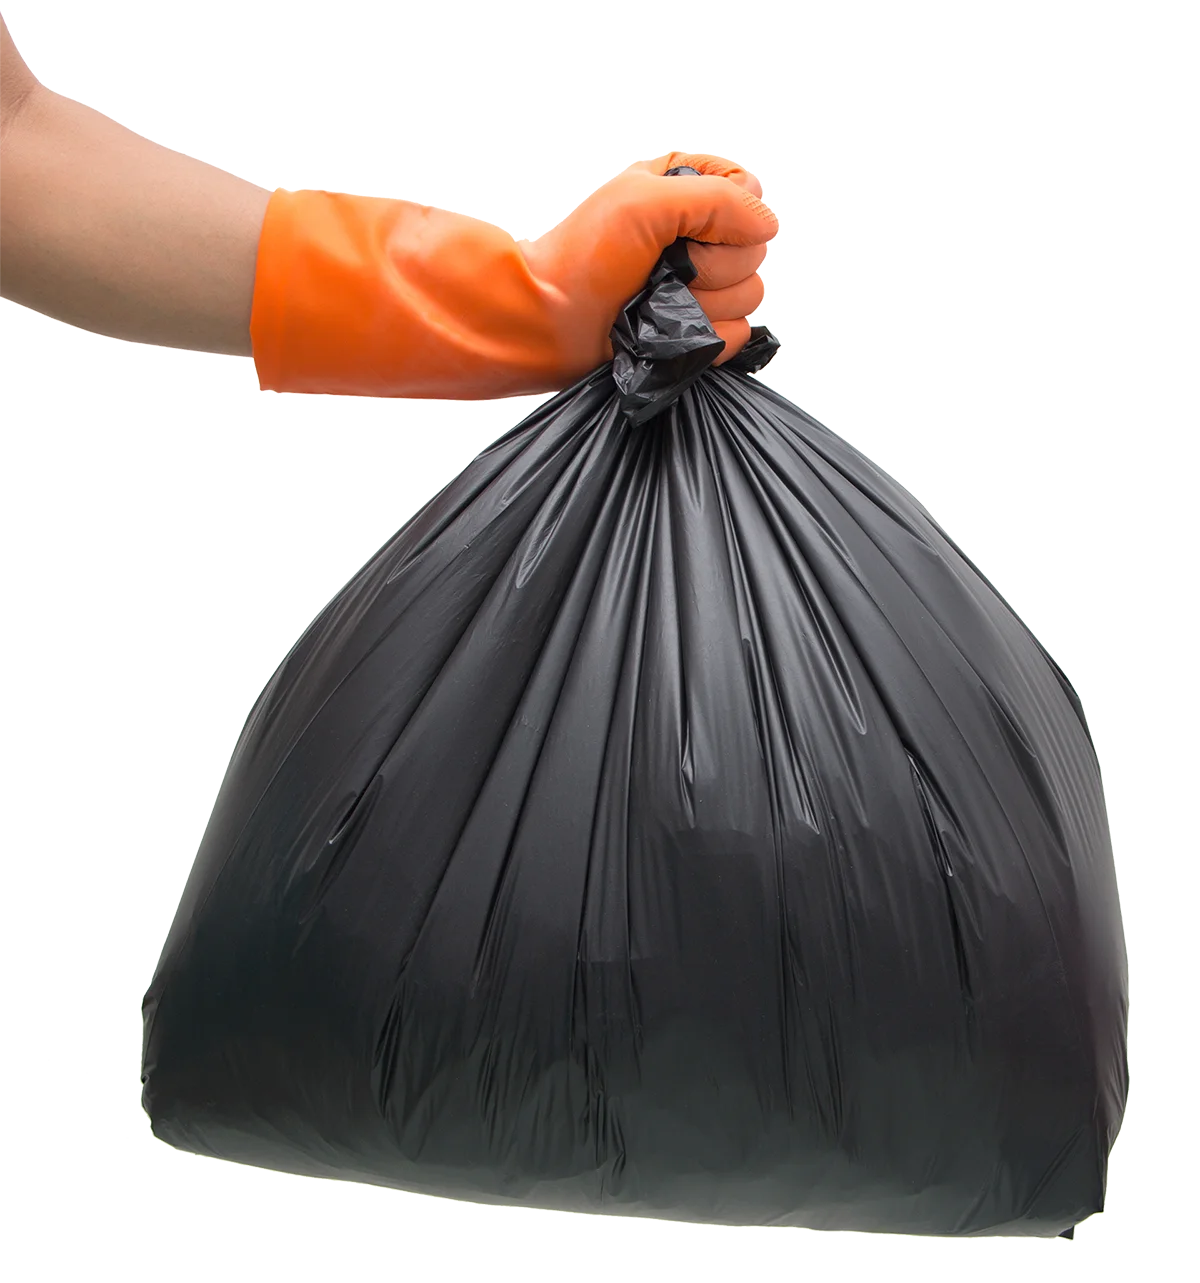 Residential Waste Service is leading the industry with efficient and high quality doorstep trash services.